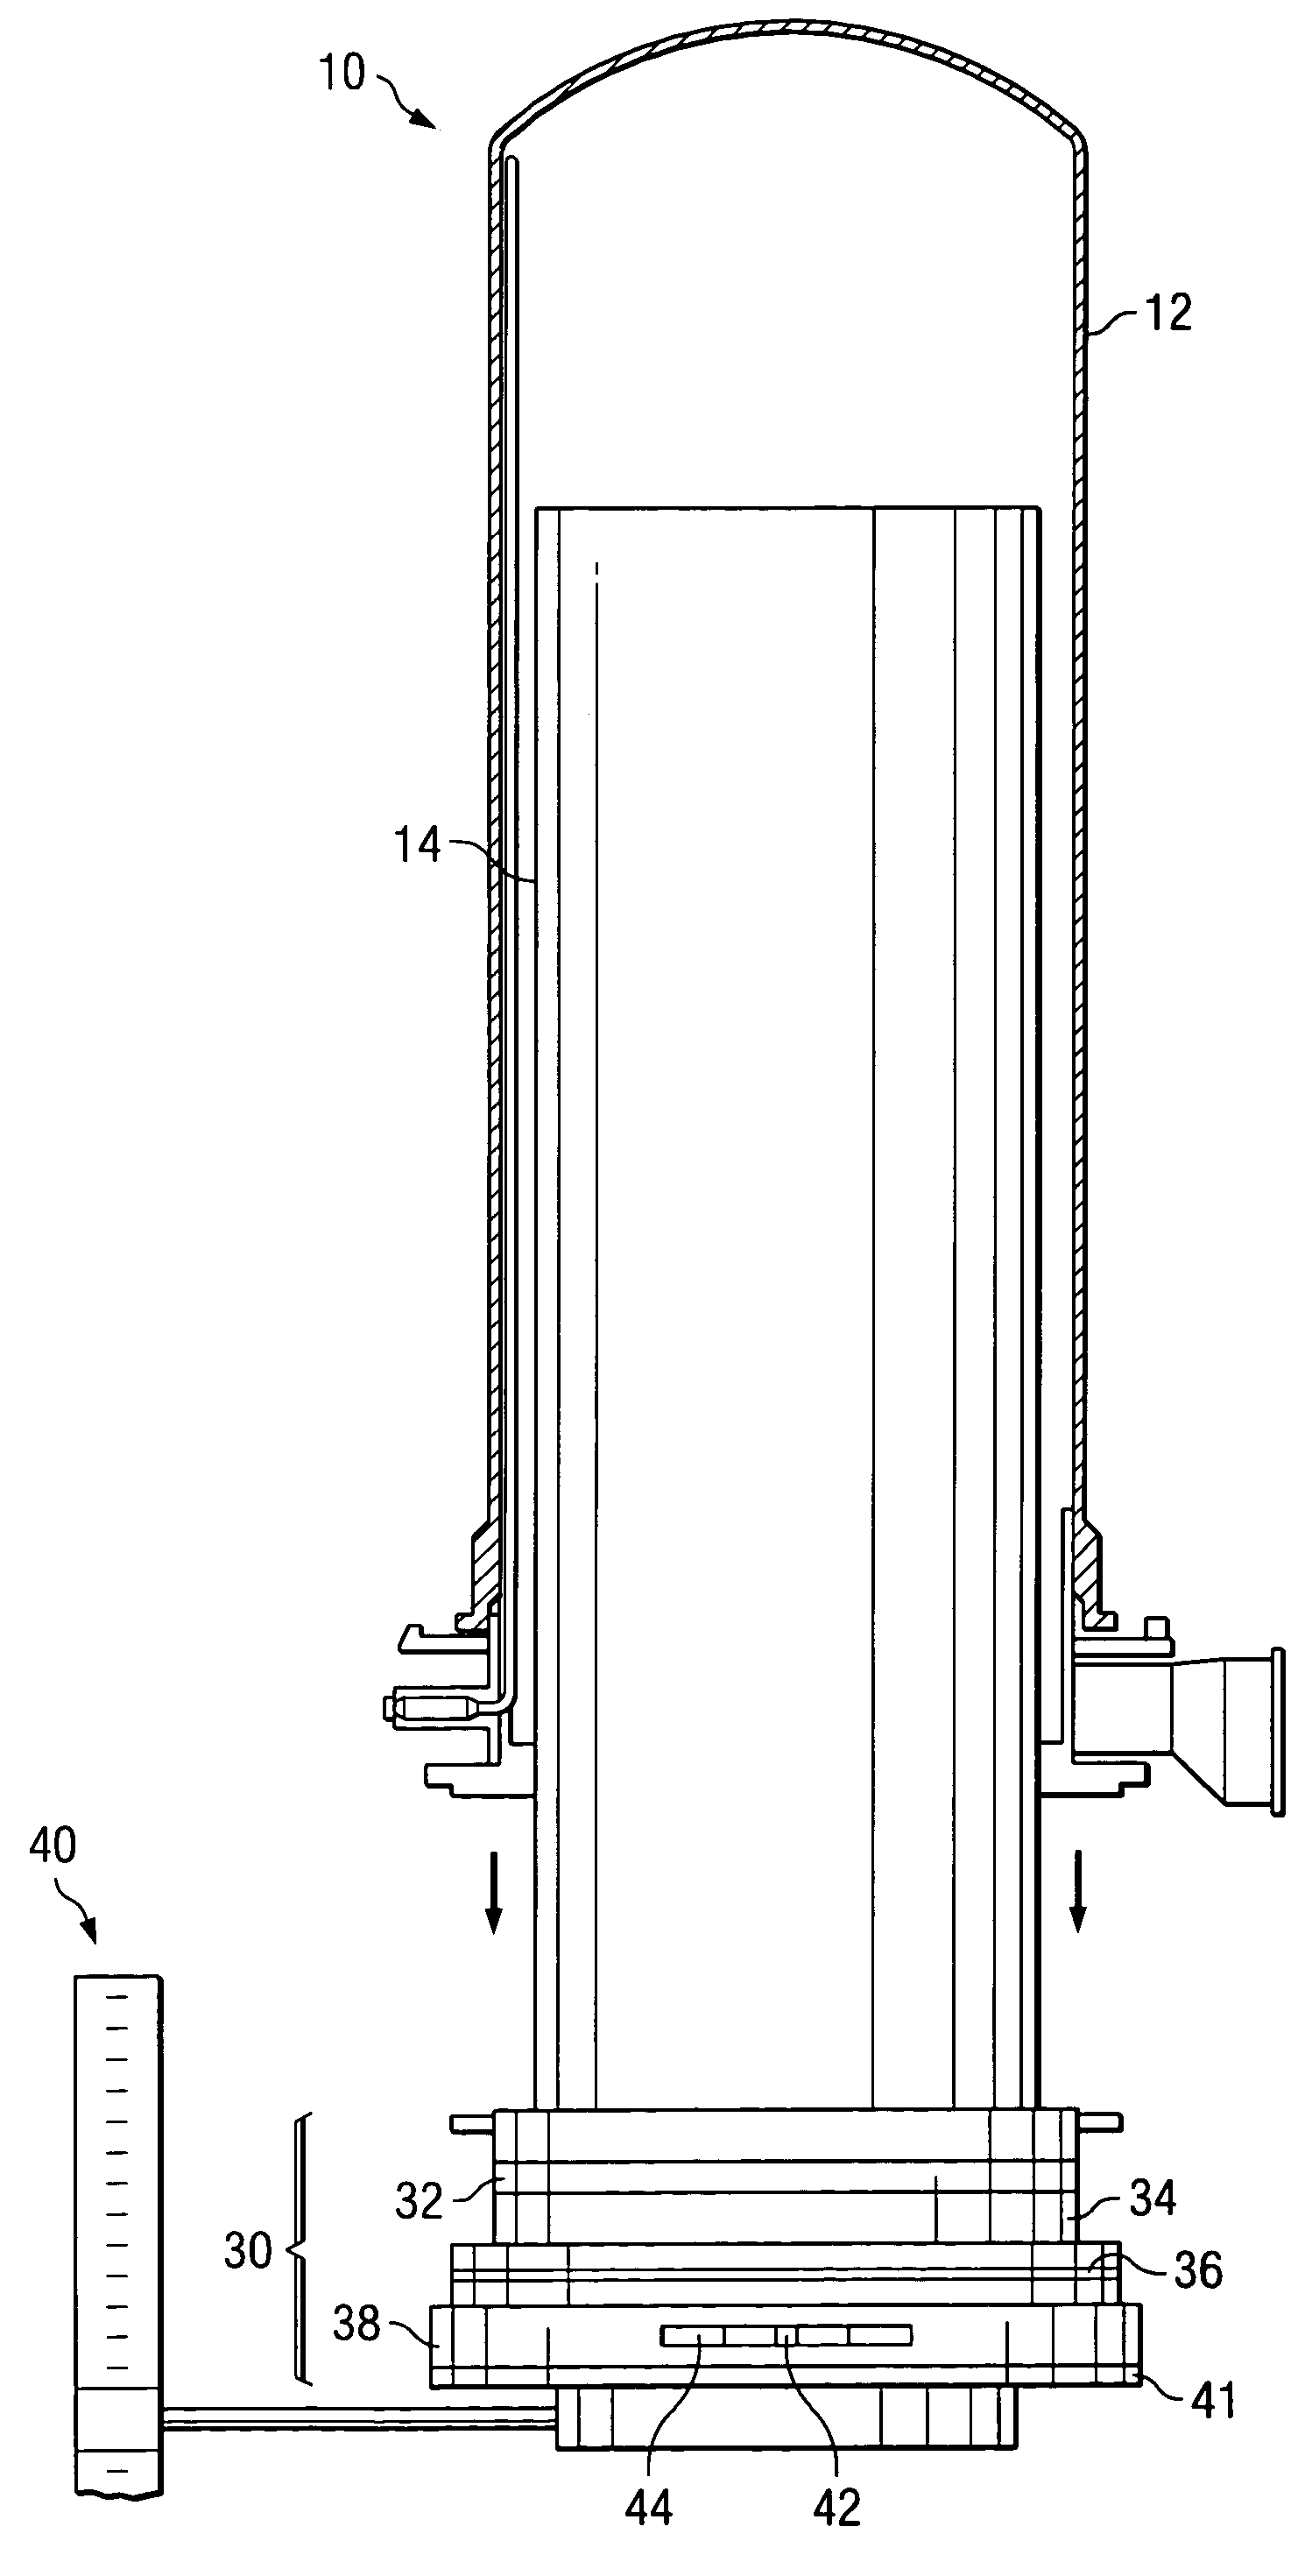 Hot liner insertion/removal fixture